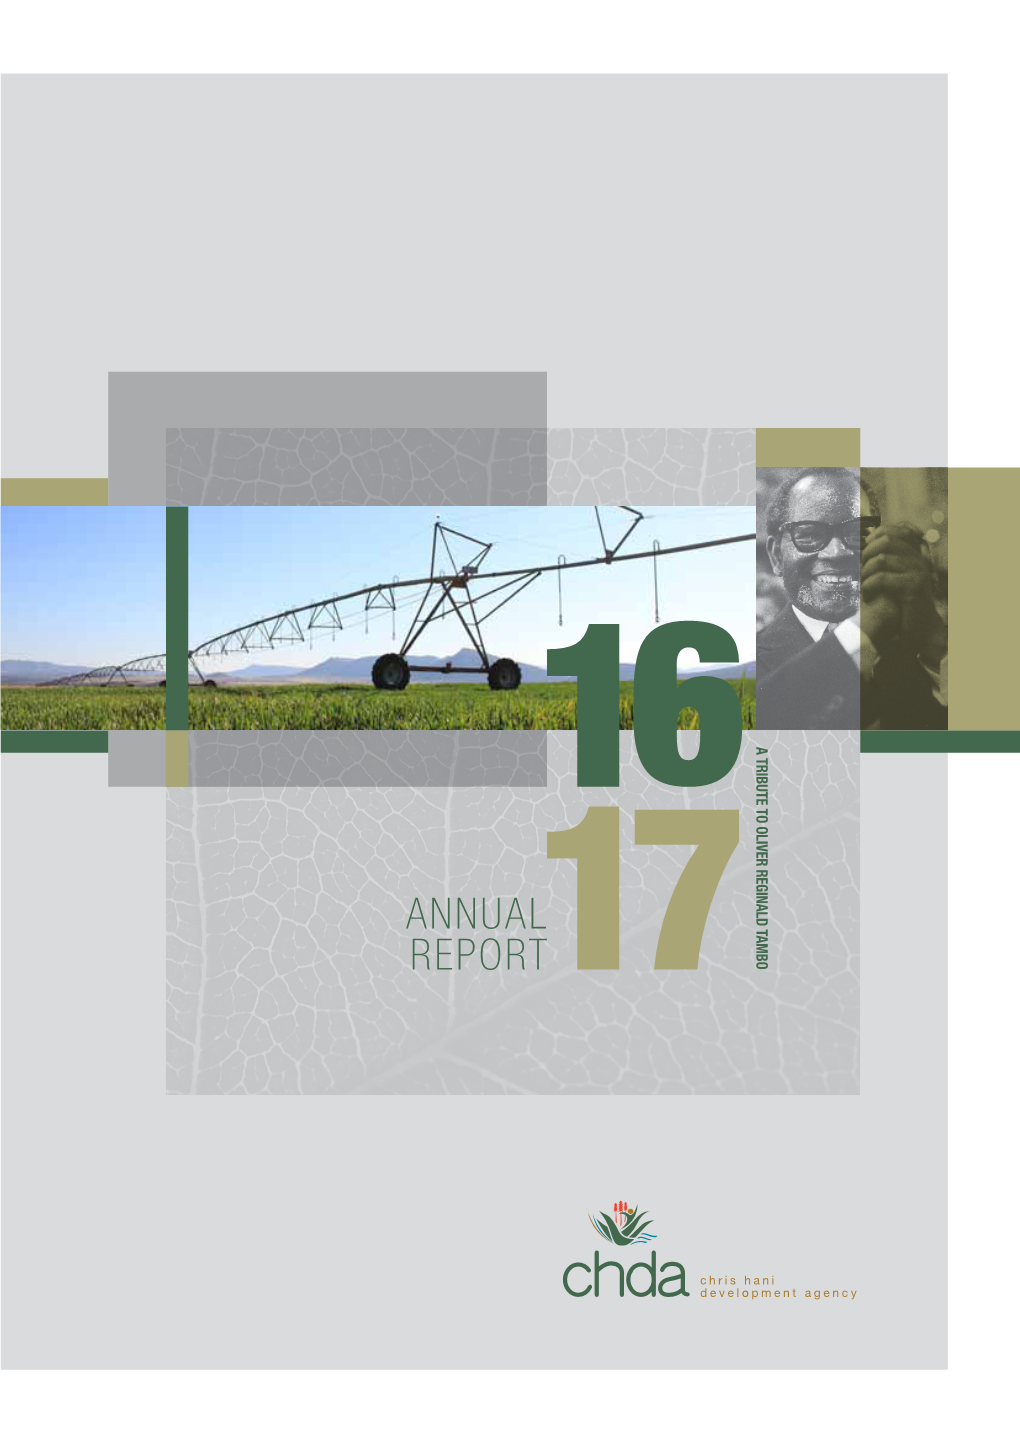 Annual Report CONTENTS